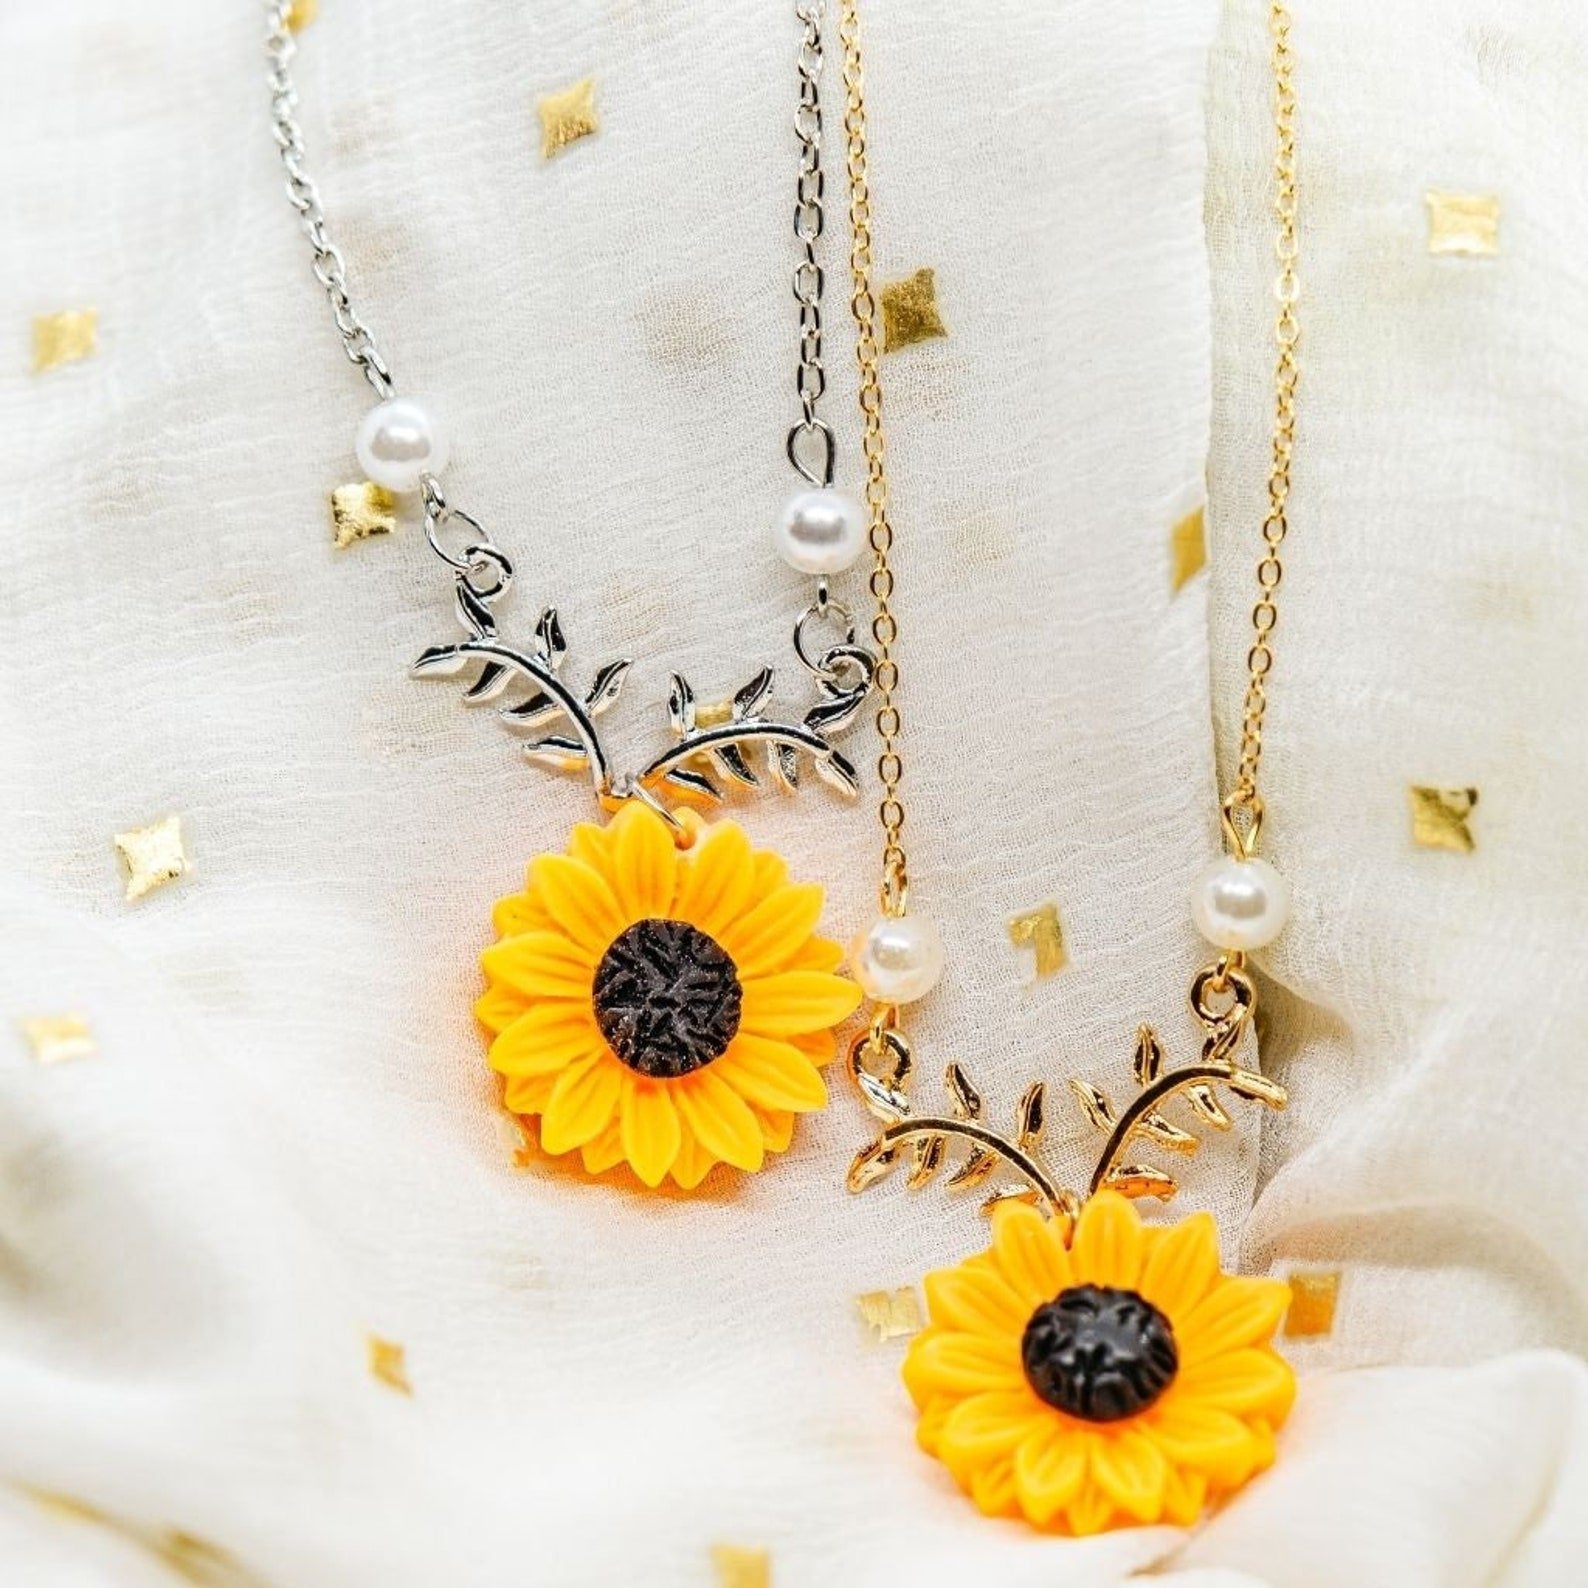 Large Sunflower Daisy Floral Charm Summer Flower Pearl Pendant Necklace